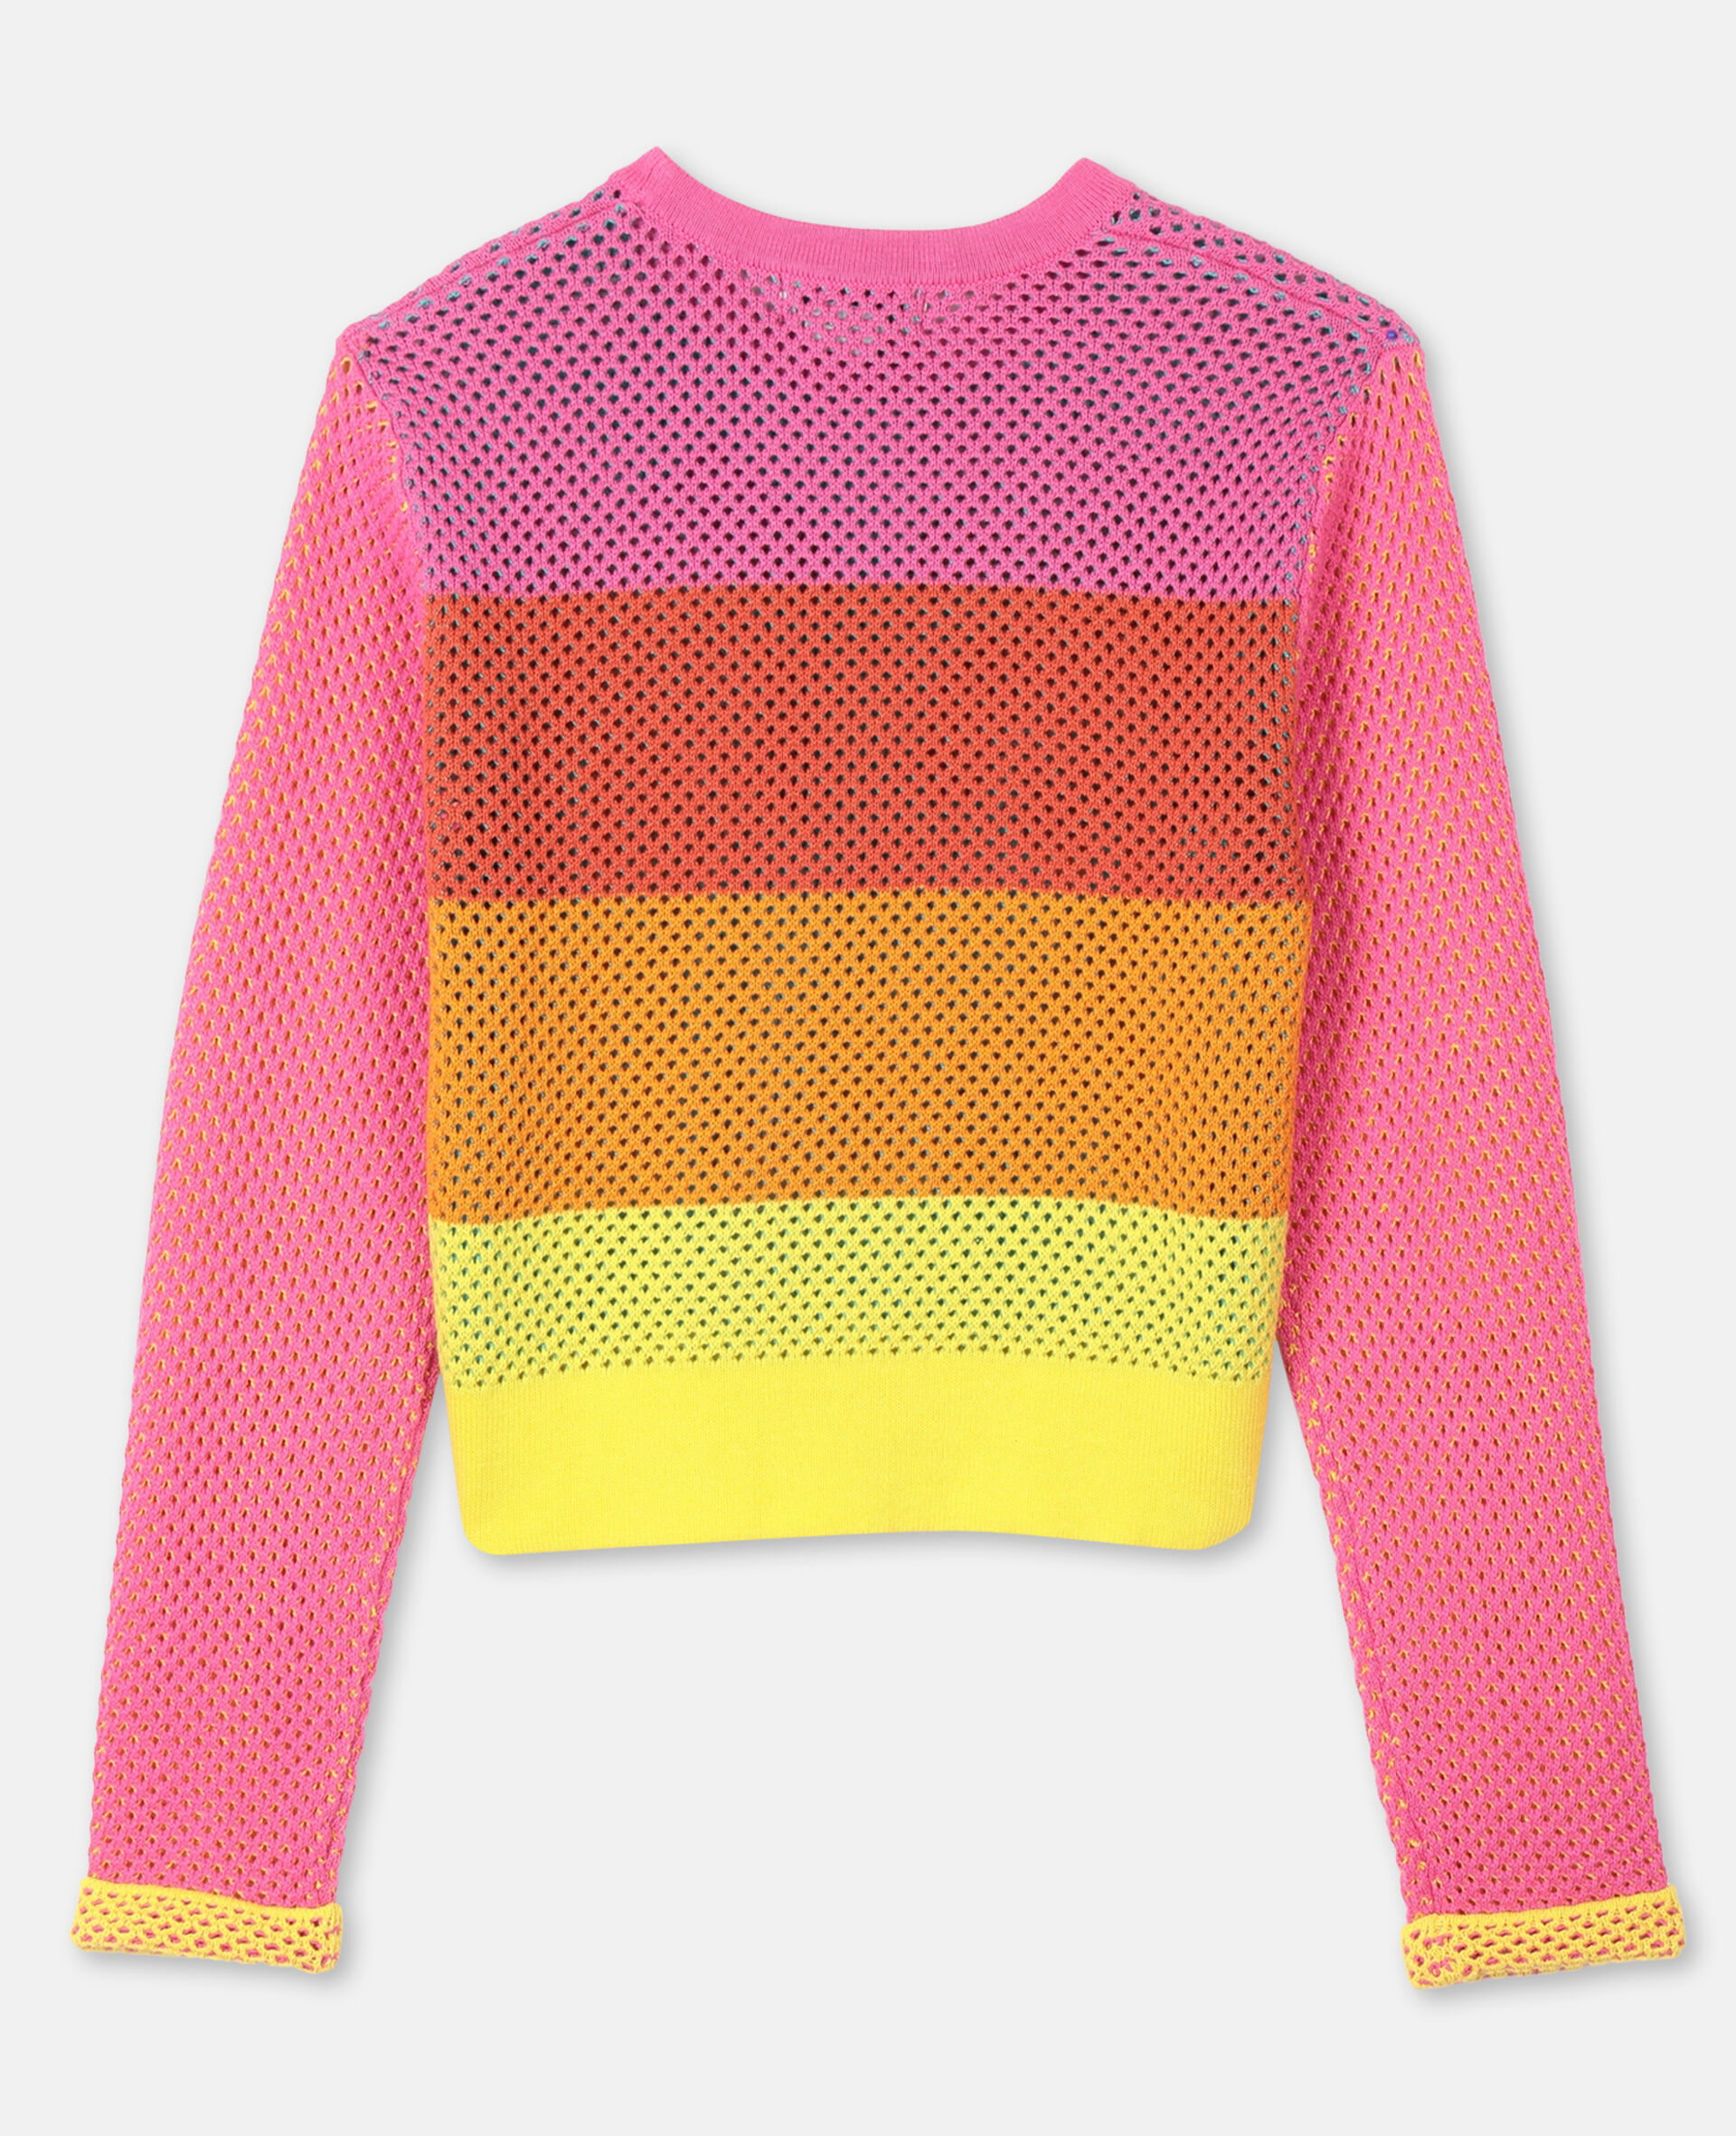 Intarsia Mesh Knit Cotton Sweater -Multicolour-large image number 3